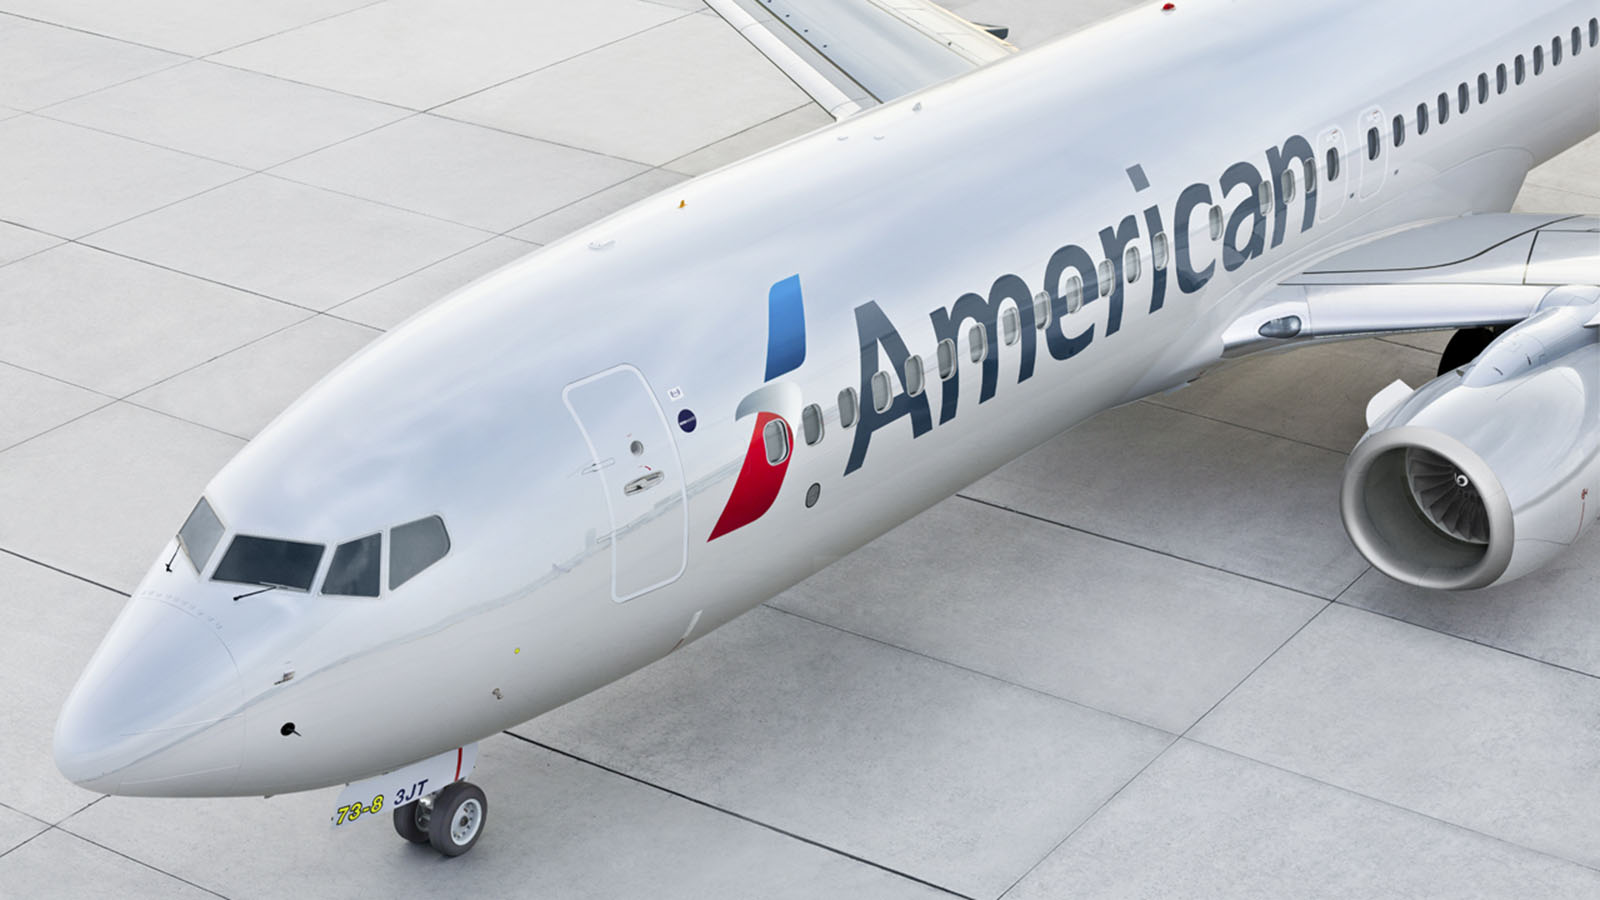 American Airlines miles may, or may not, be transferred when a member passes away